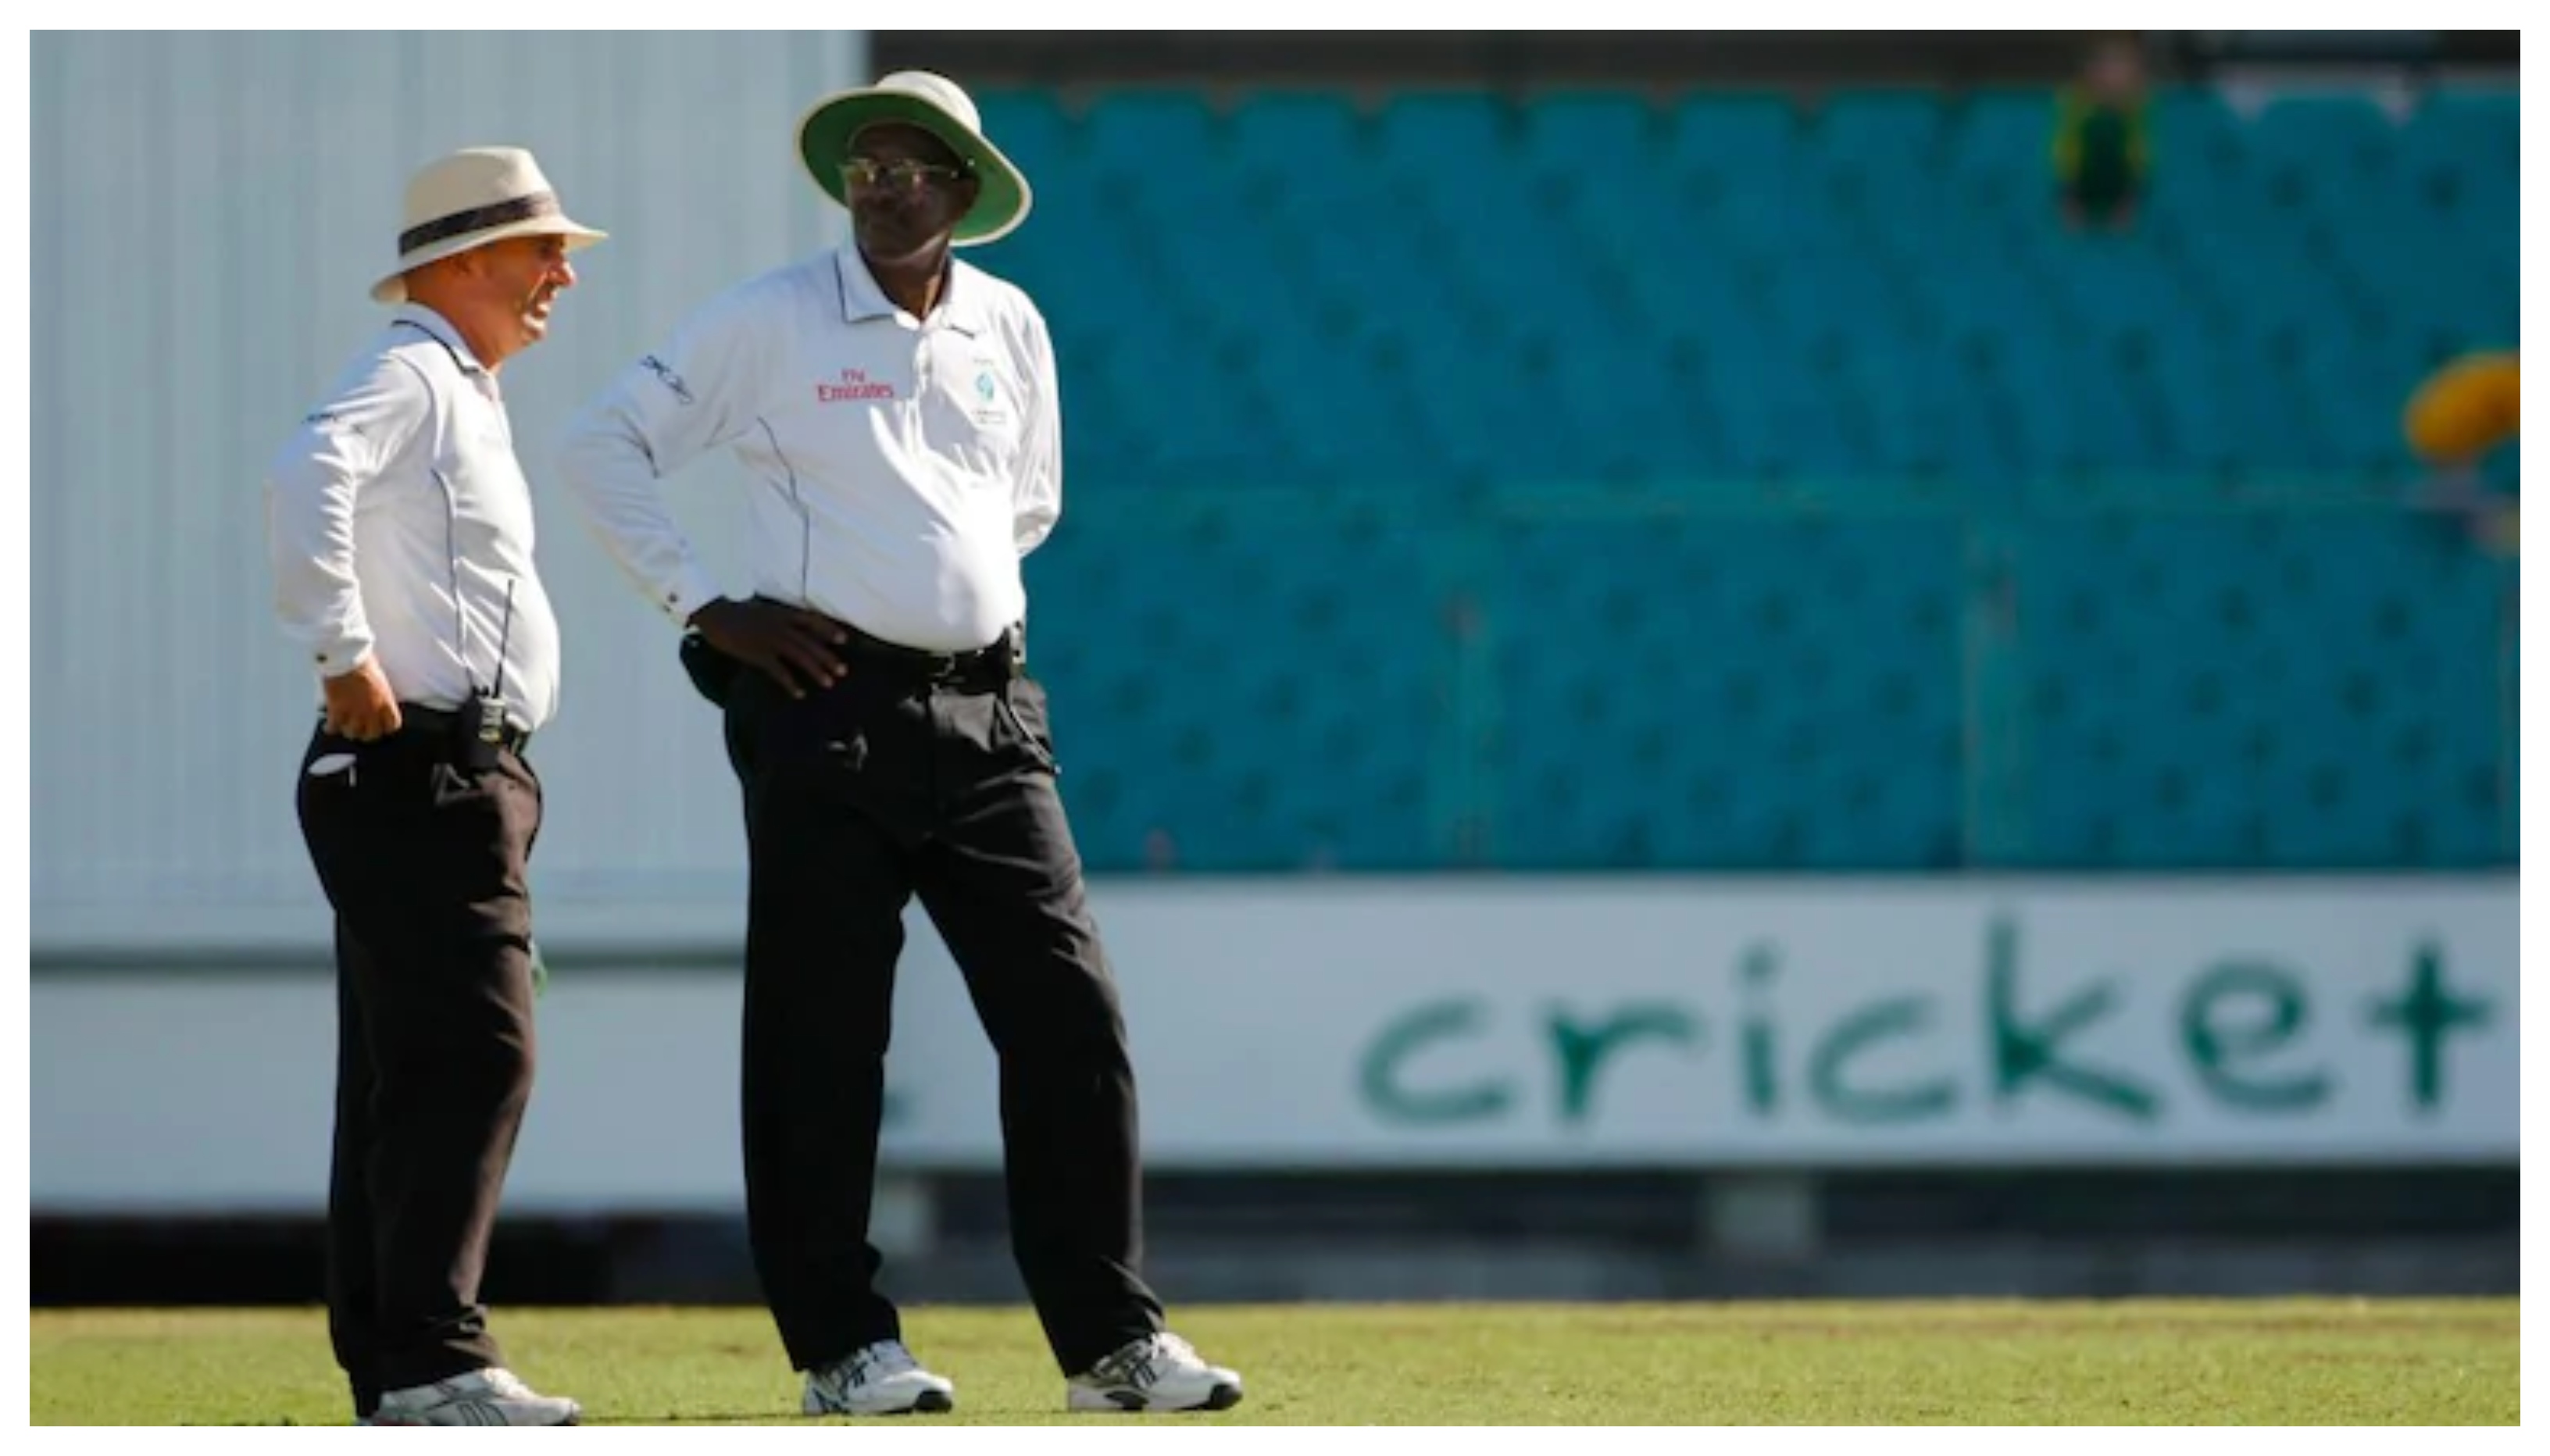 Steve Bucknor and Mark Benson were criticised for their umpiring in the 2008 Sydney Test | Reuters